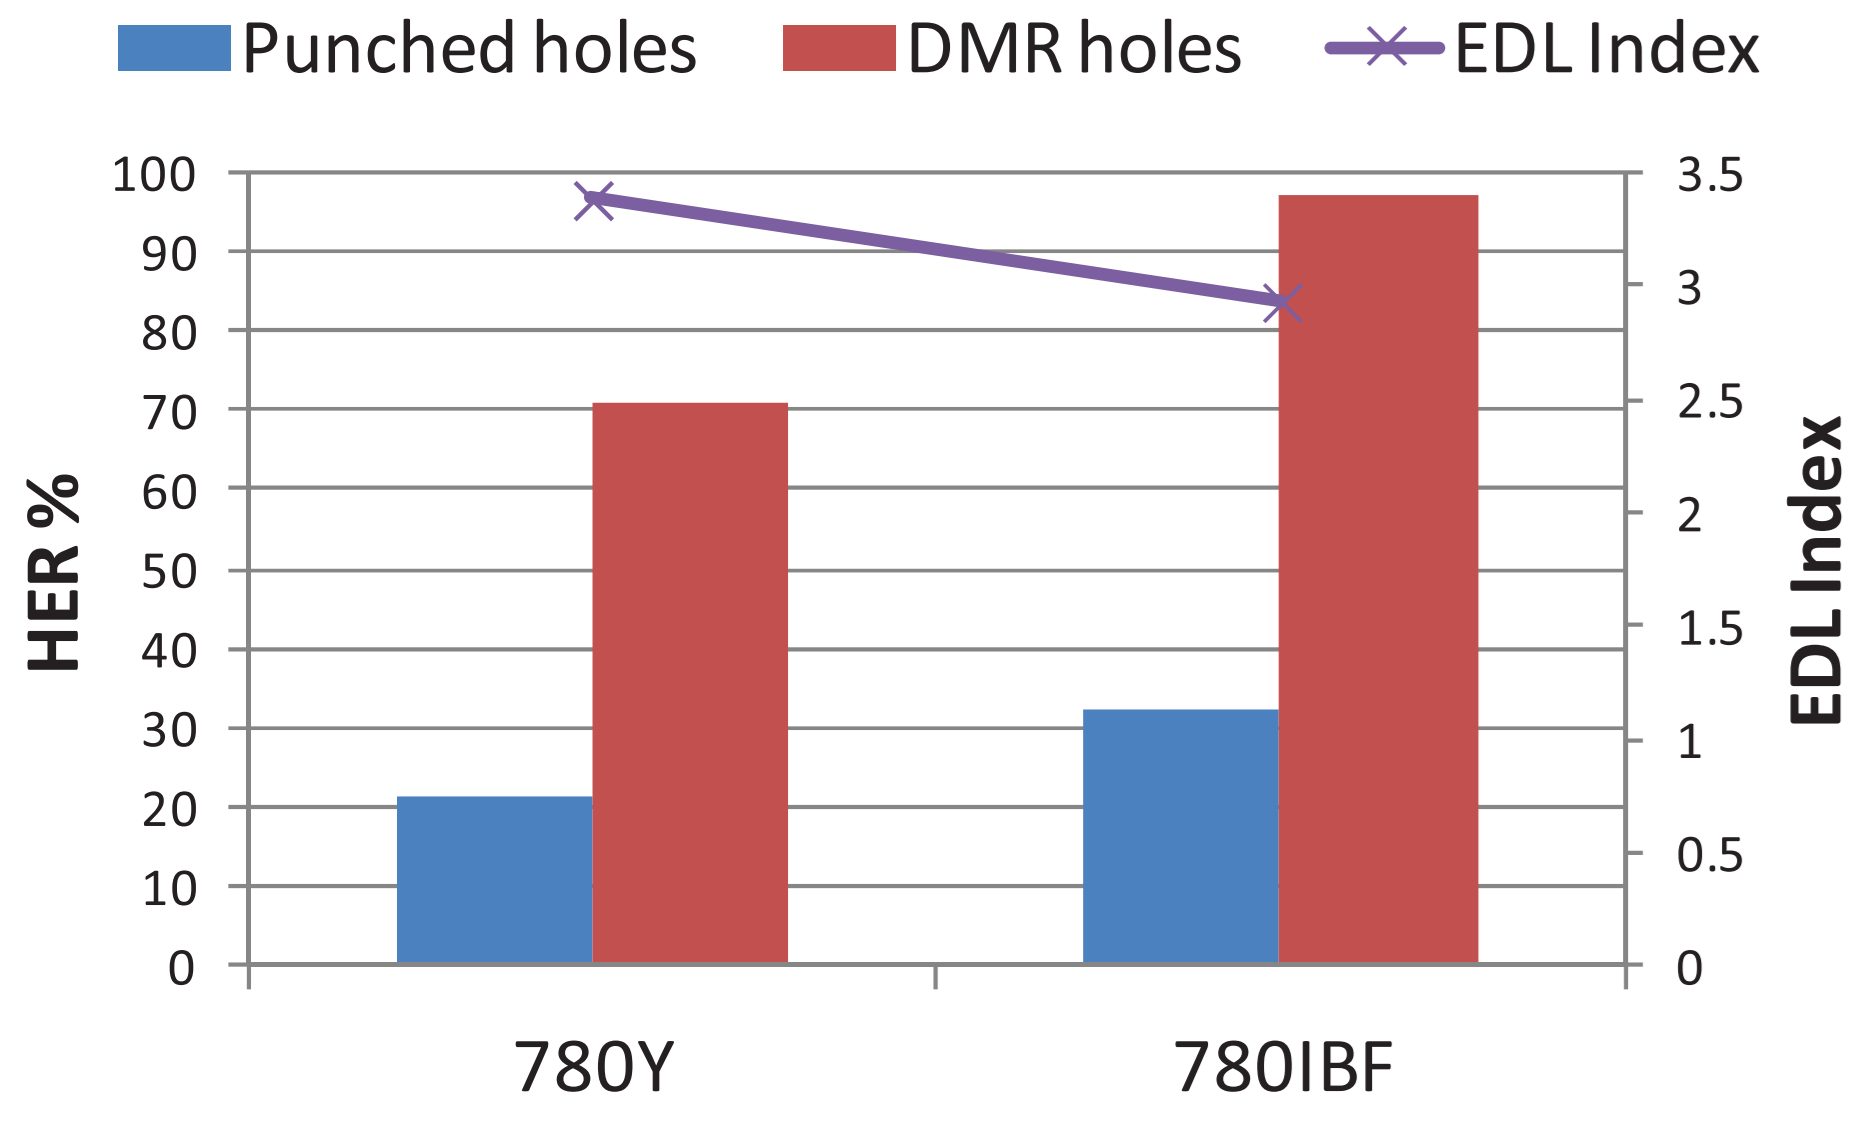 Figure 3: Improvement in Hole Expansion improves with grade modifications and edge quality.  DMR = drilled, milled, and reamed hole; EDL = Edge Ductility Loss index, the ratio of the hole expansion of the DMR hole to that of the punched hole.C-10